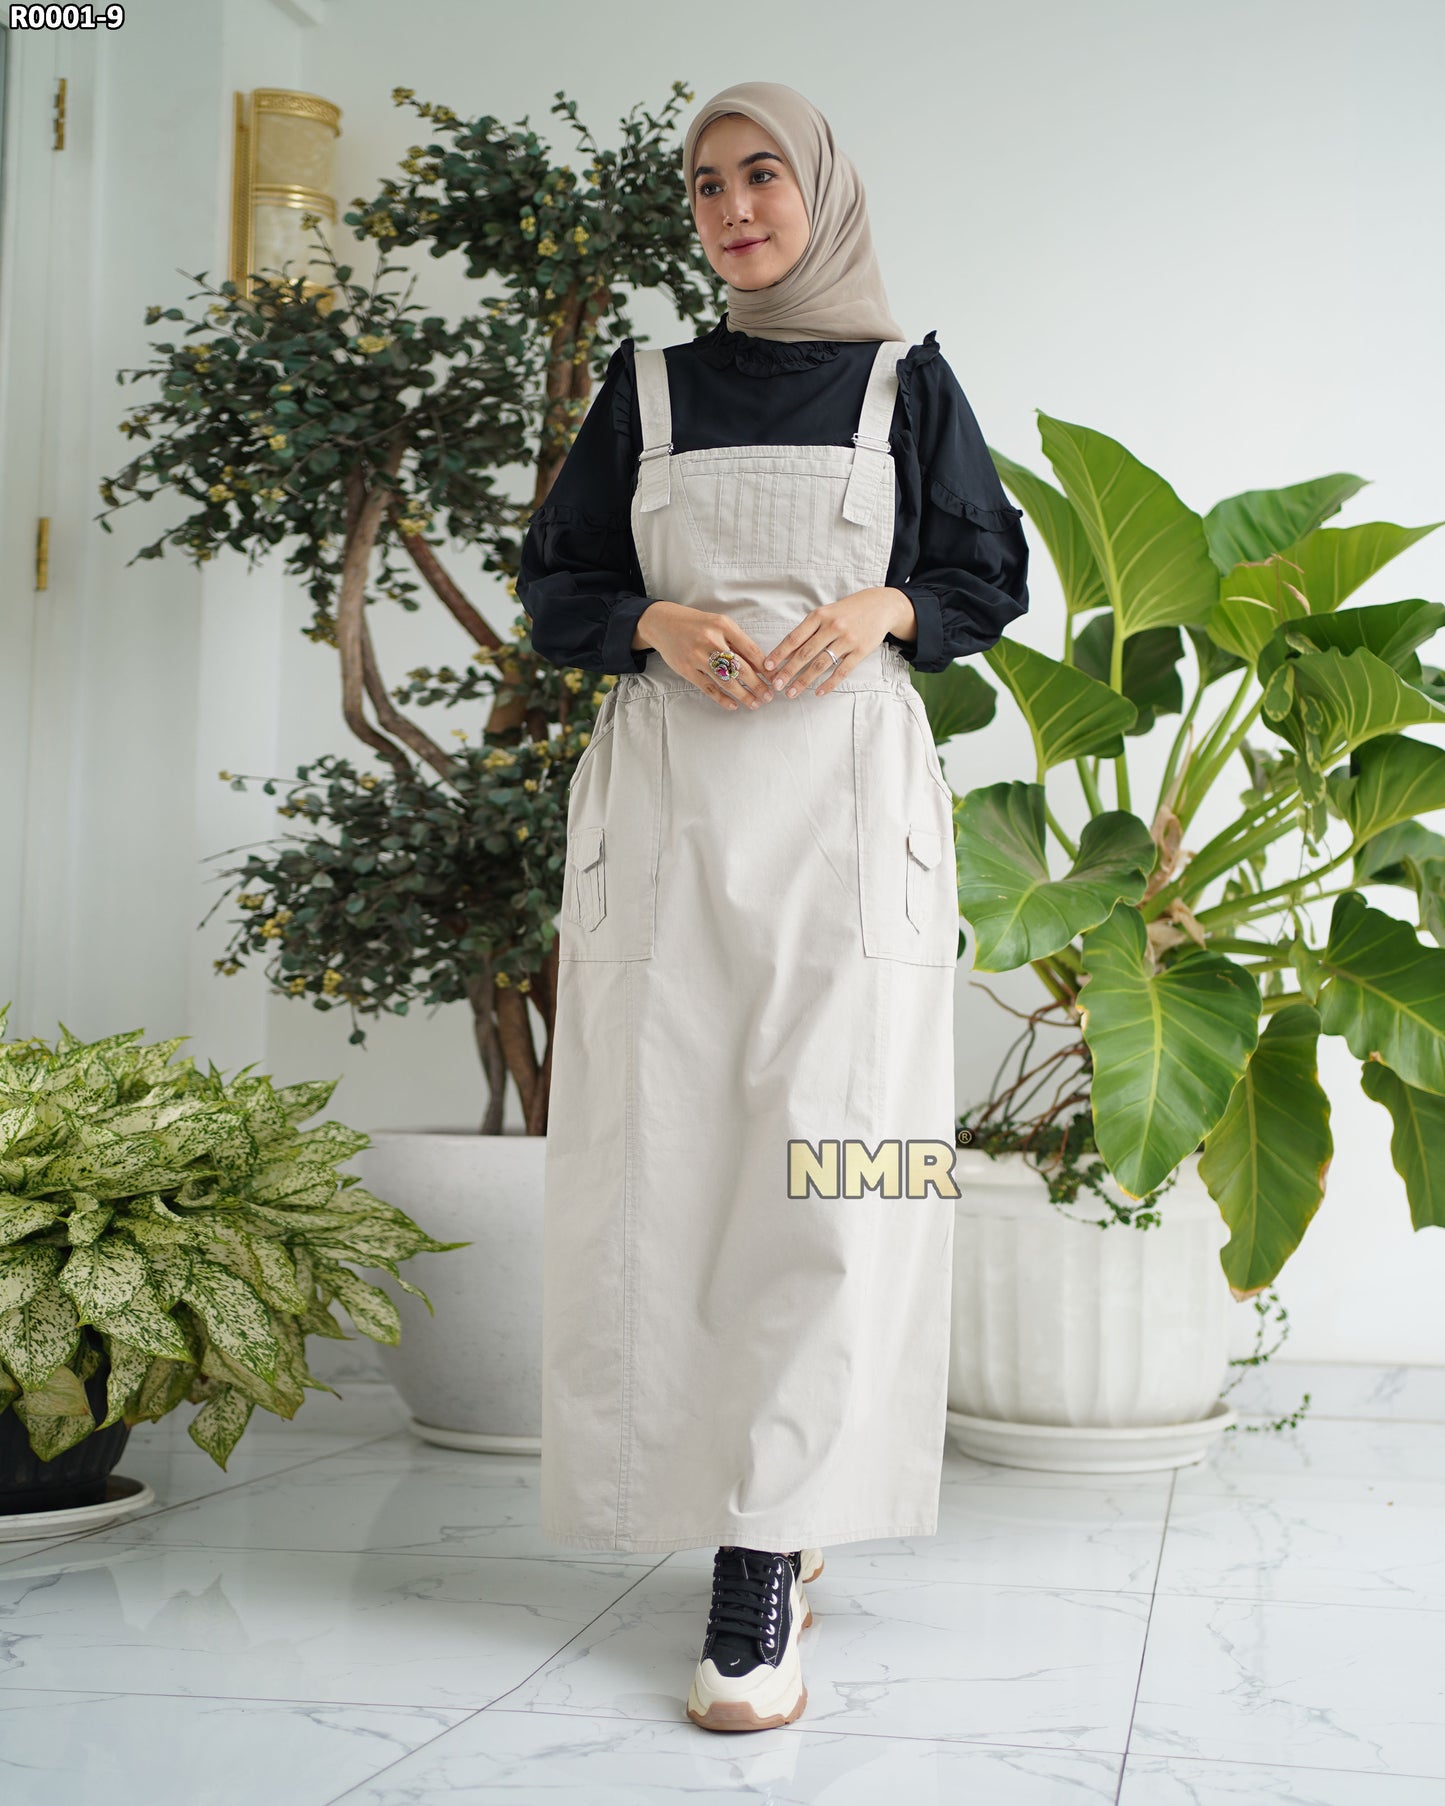 NMR Gamis Jumpsuit Overall Baby Canvas Vol R001-9